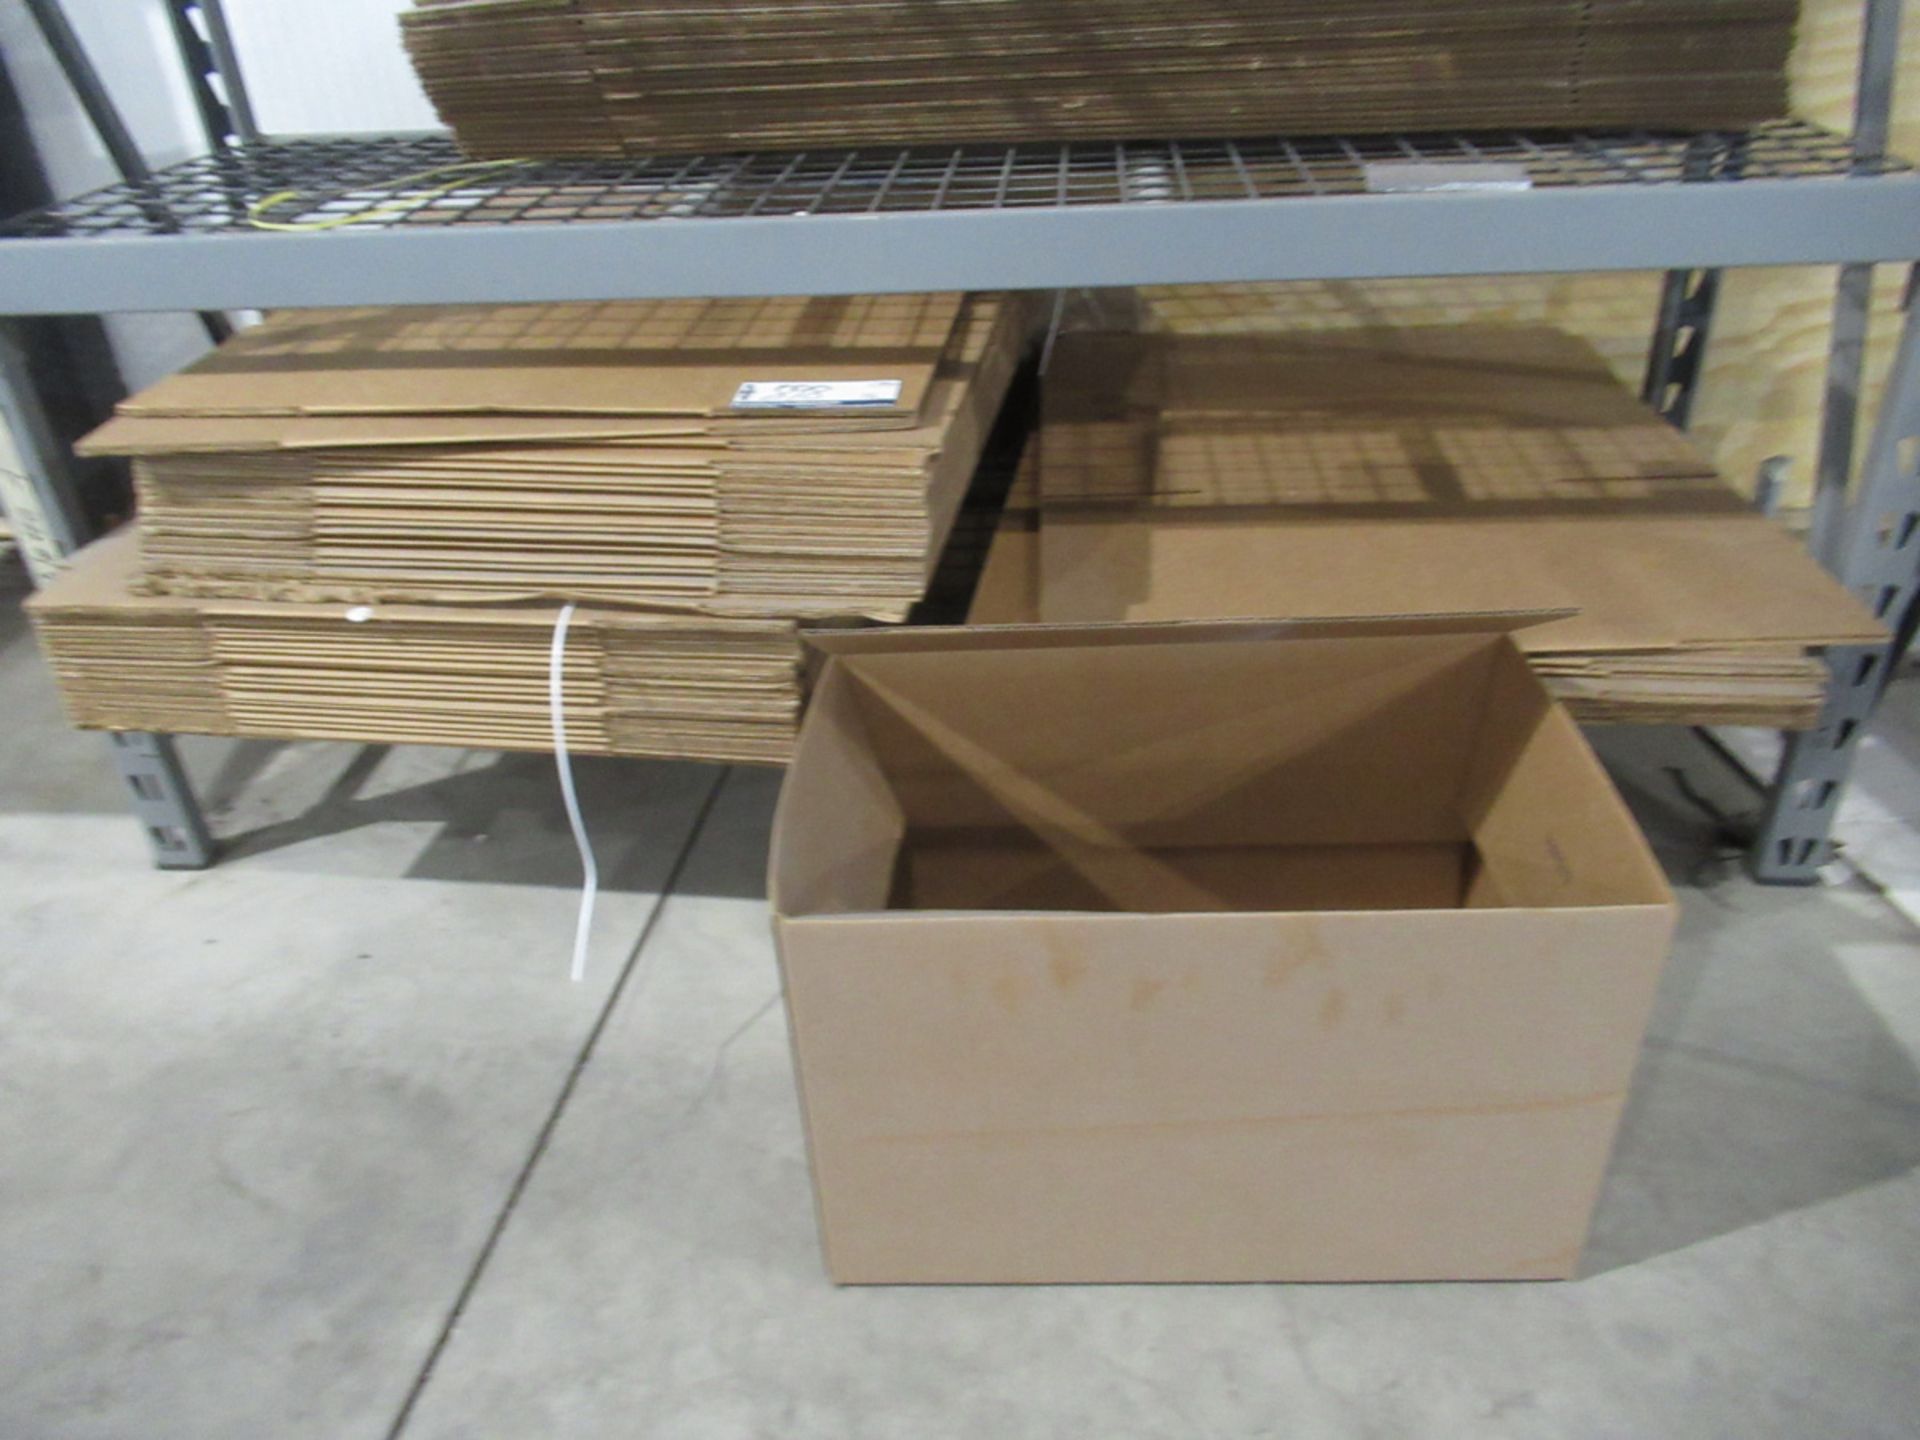 LOT OF 200 24" X 15" X 15" CARDBOARD BOXES - Image 2 of 3